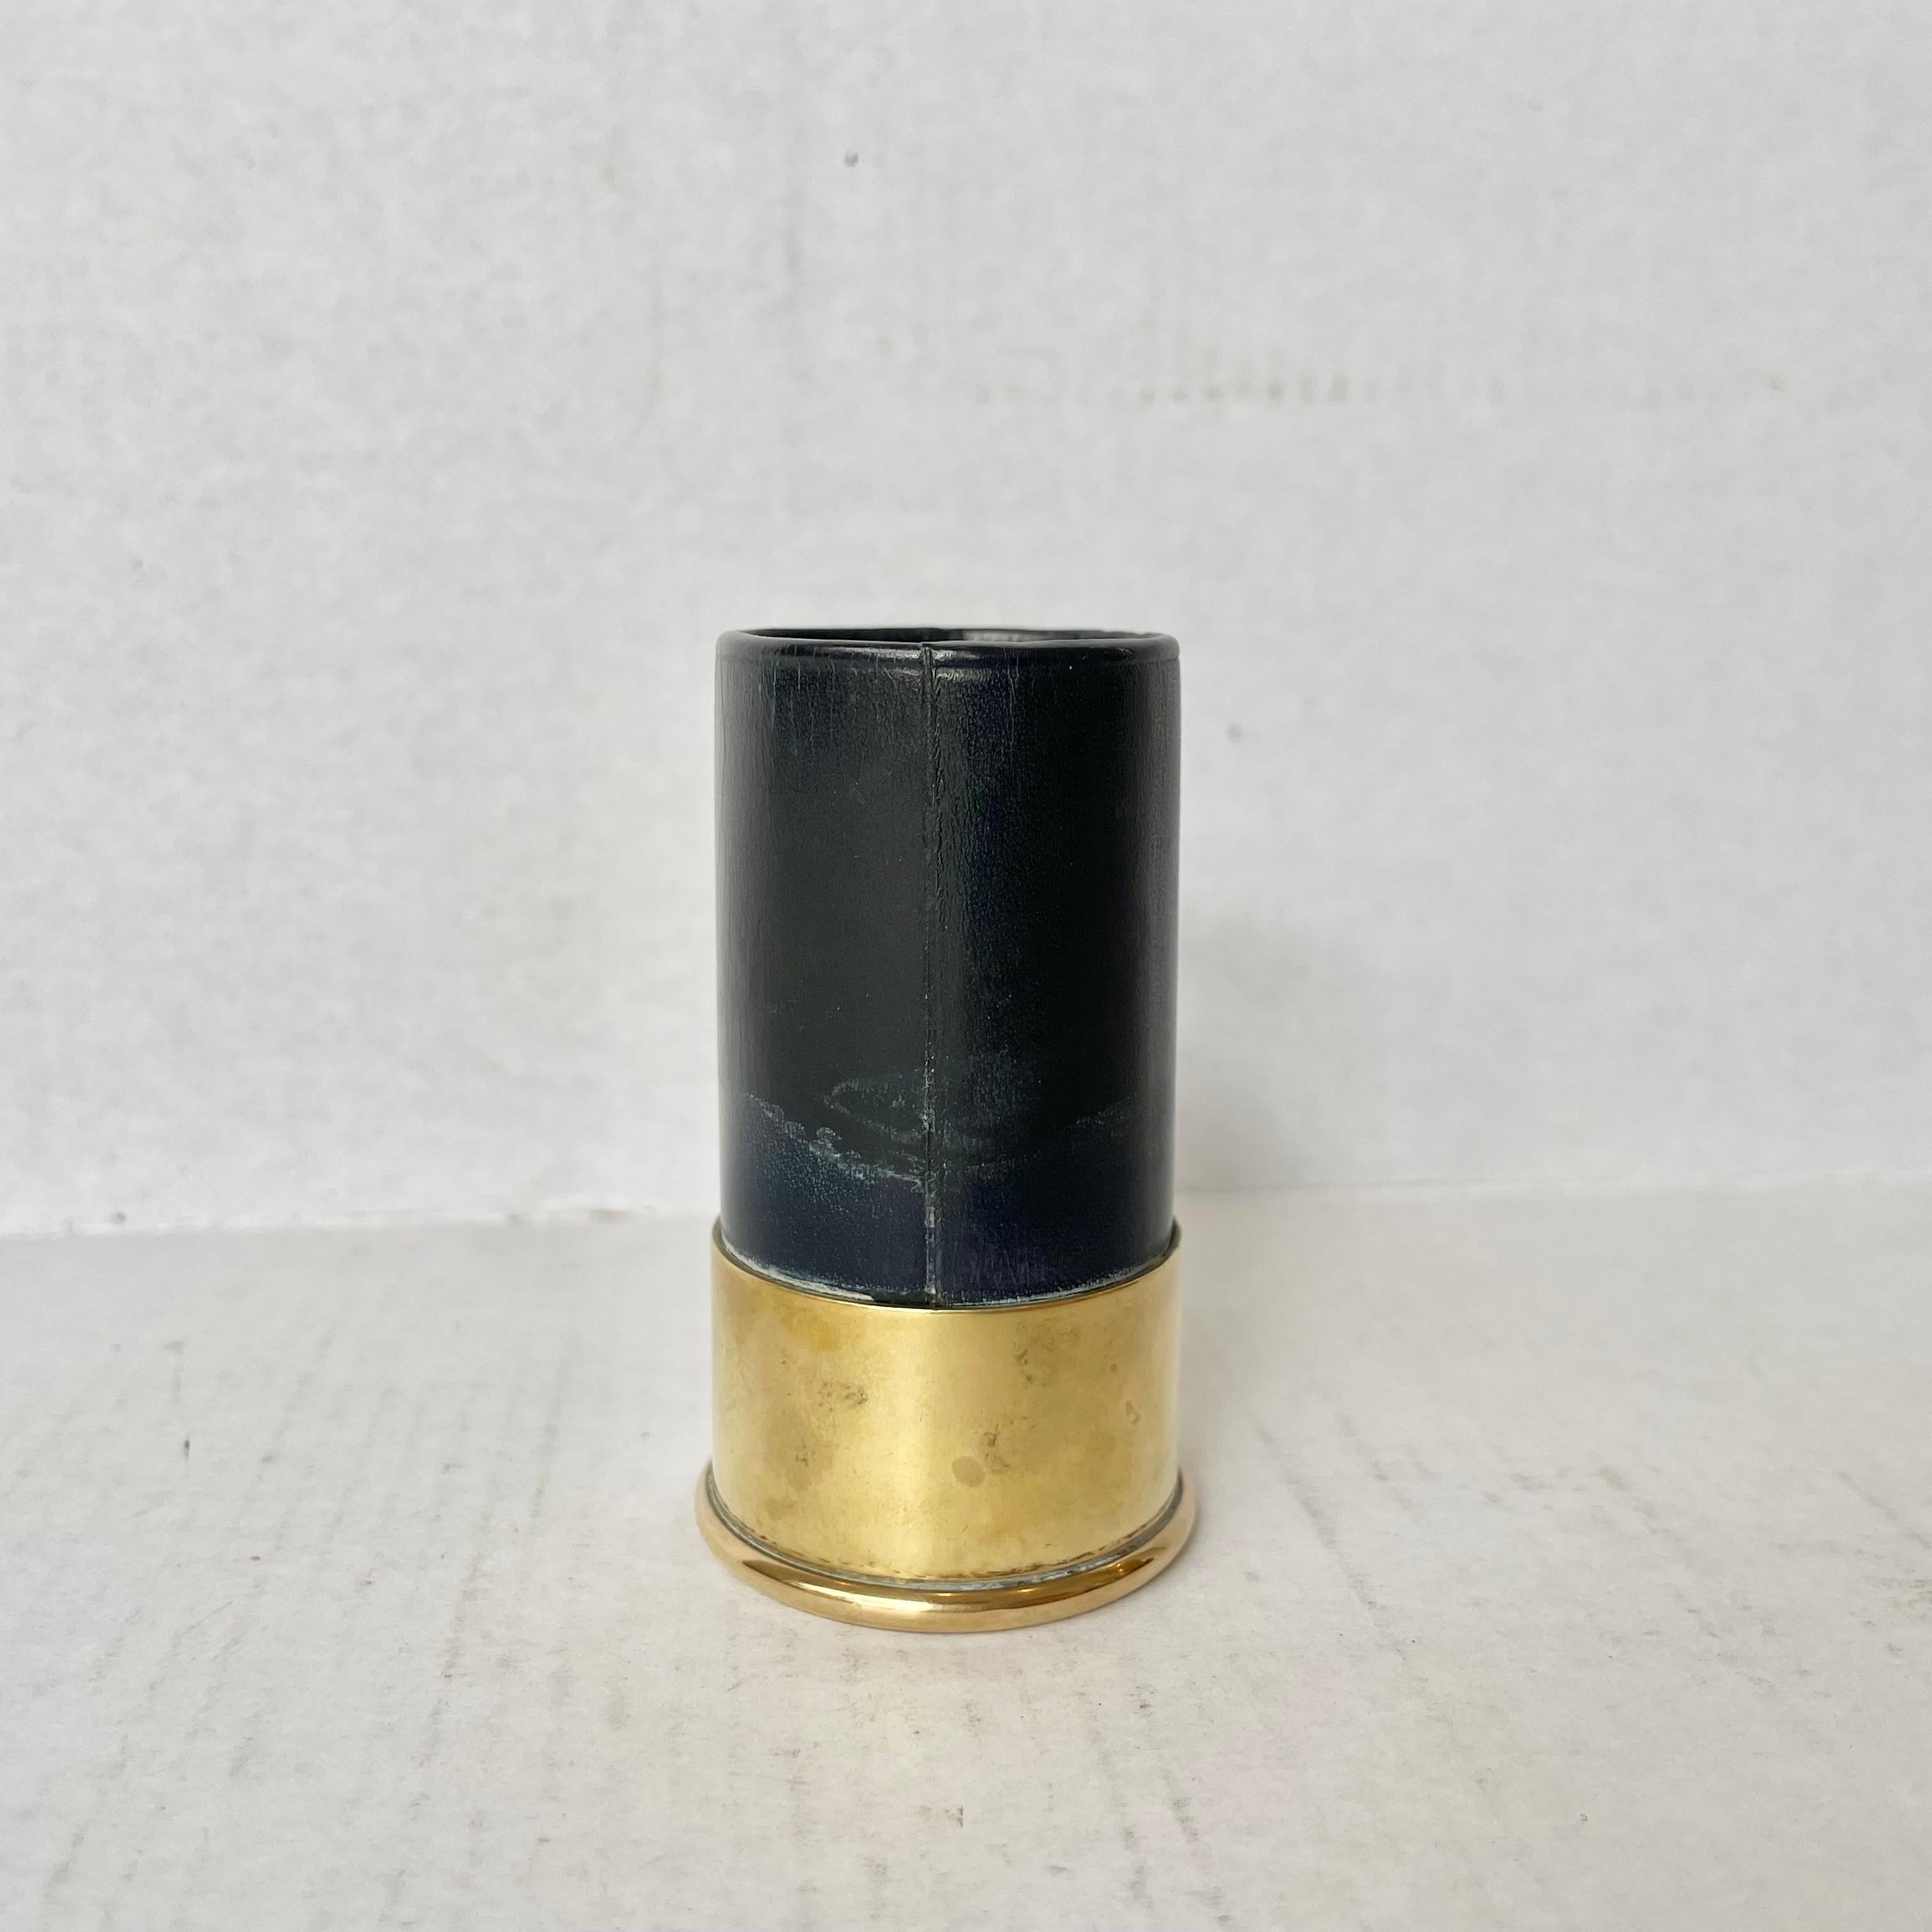 Hermès Brass and Leather Shotgun Shell Pen Holder, 1970s France In Good Condition For Sale In Los Angeles, CA